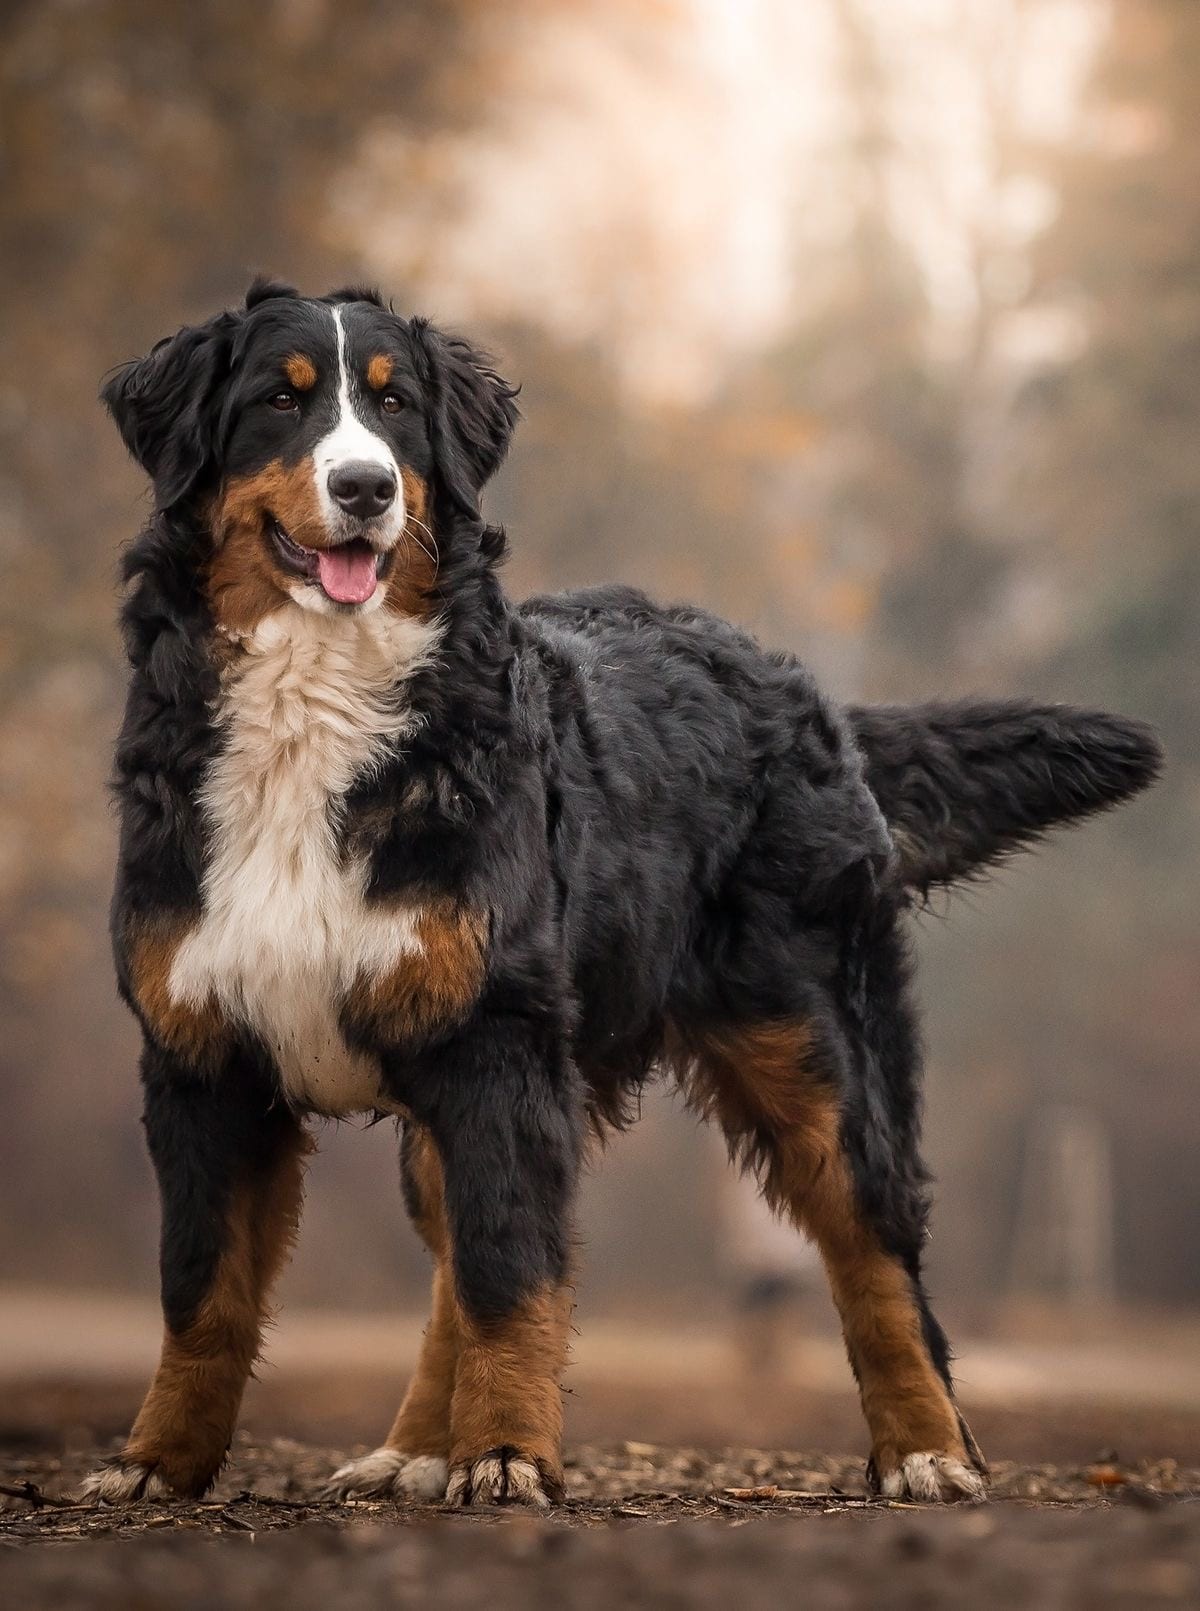 A Bernese Mountain Dog standing on the ground